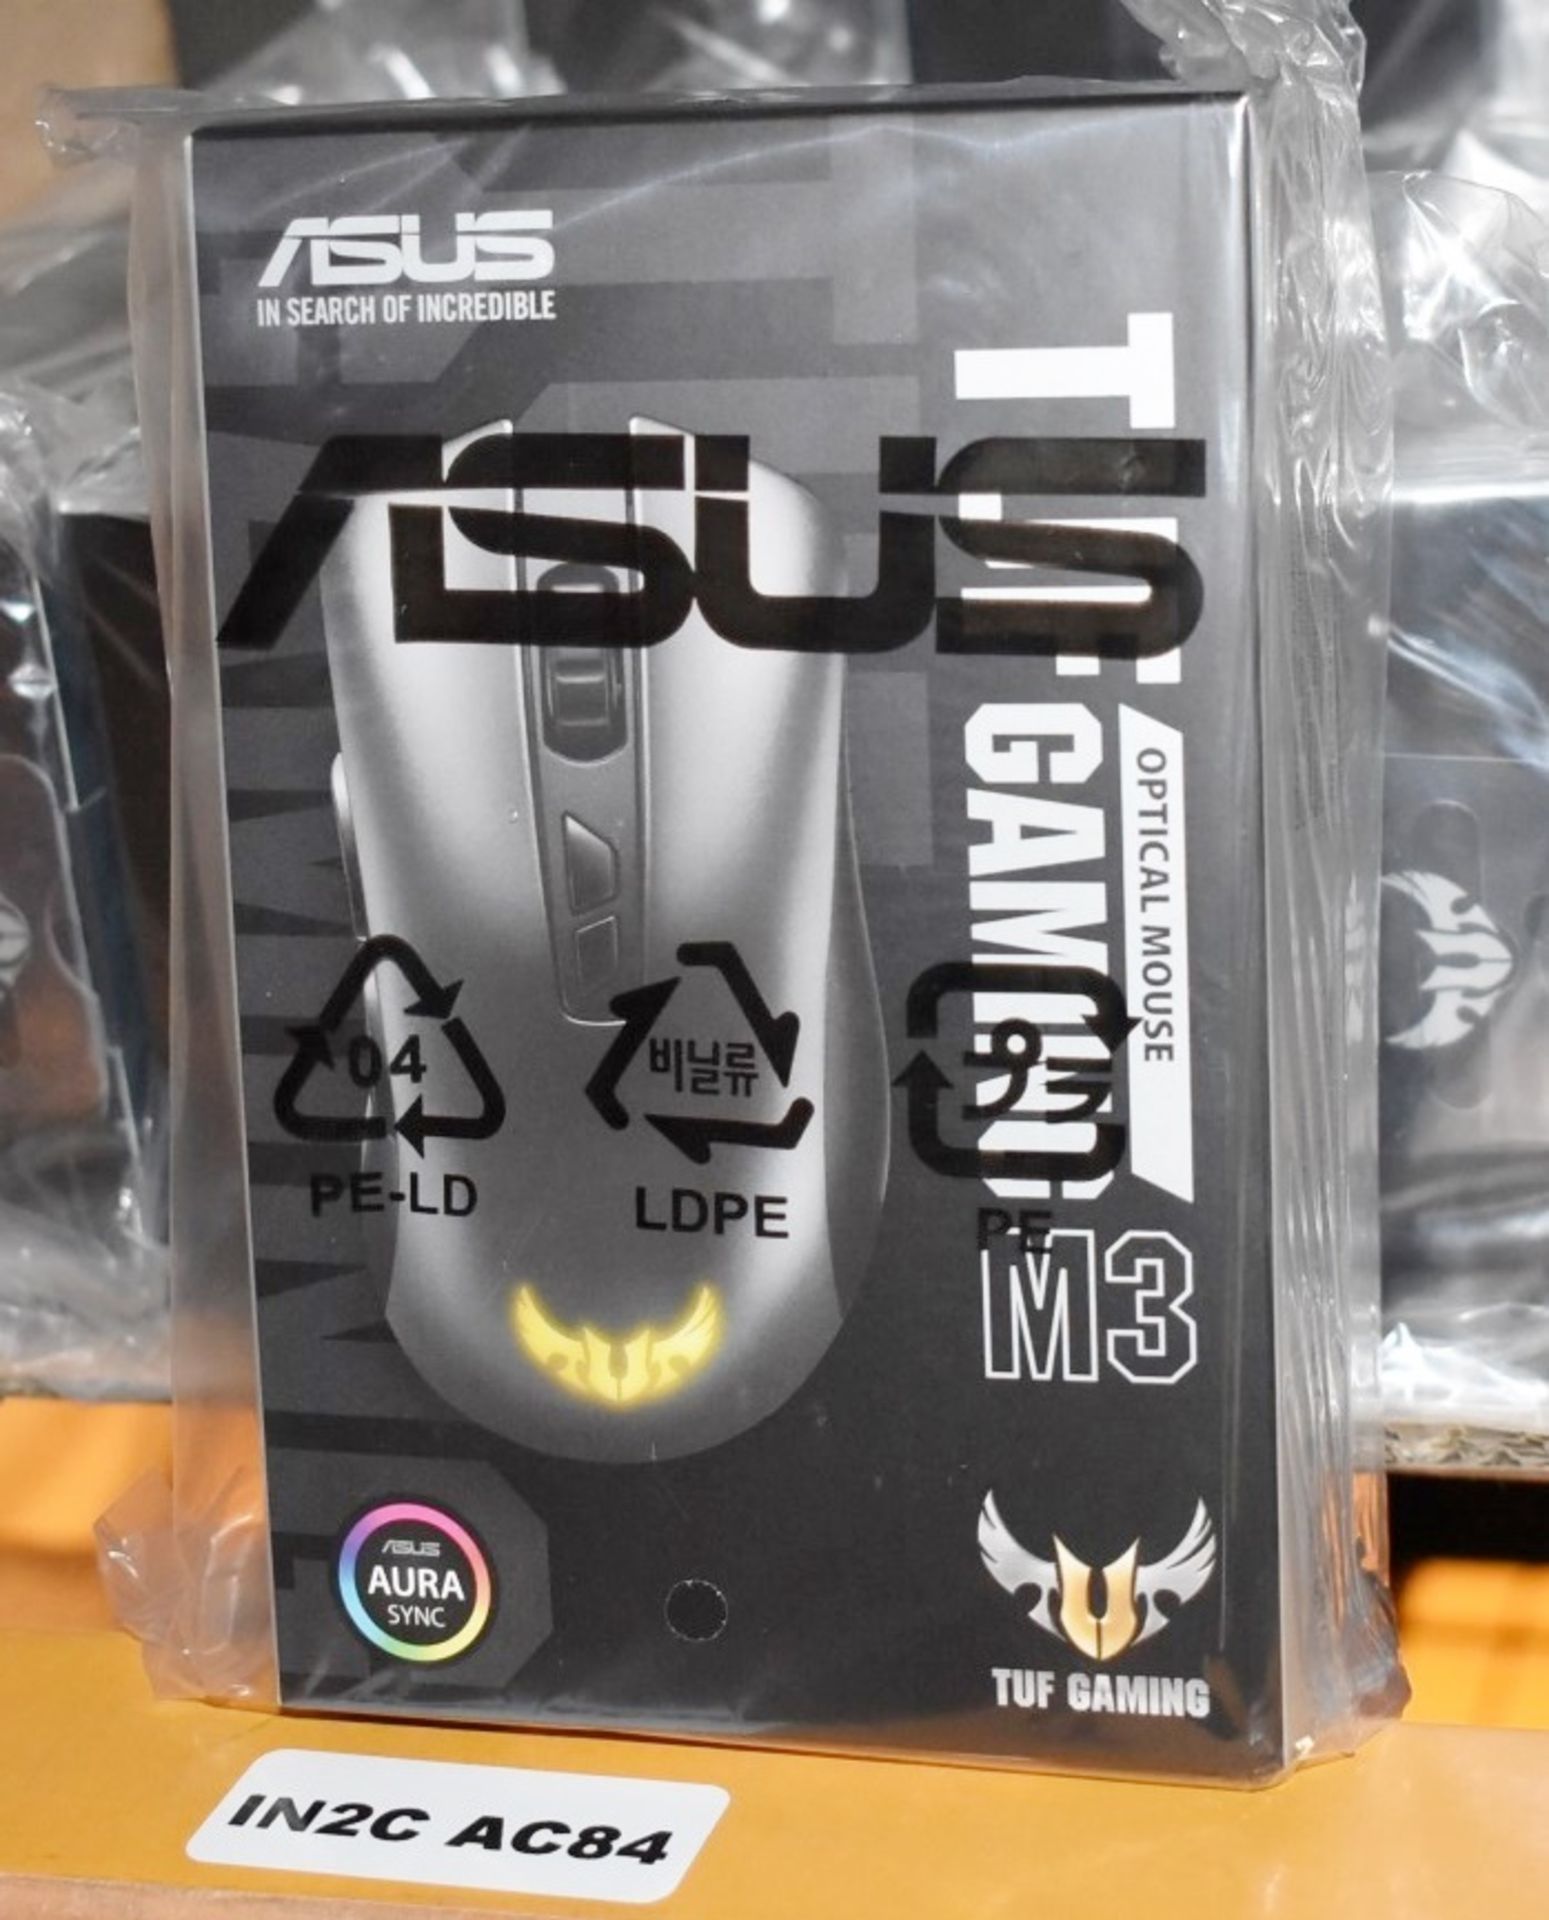 1 x Asus TUF Gaming M3 Mouse - 7000 dpi Optical Sensor - Seven Programmable Buttons - Image 3 of 3